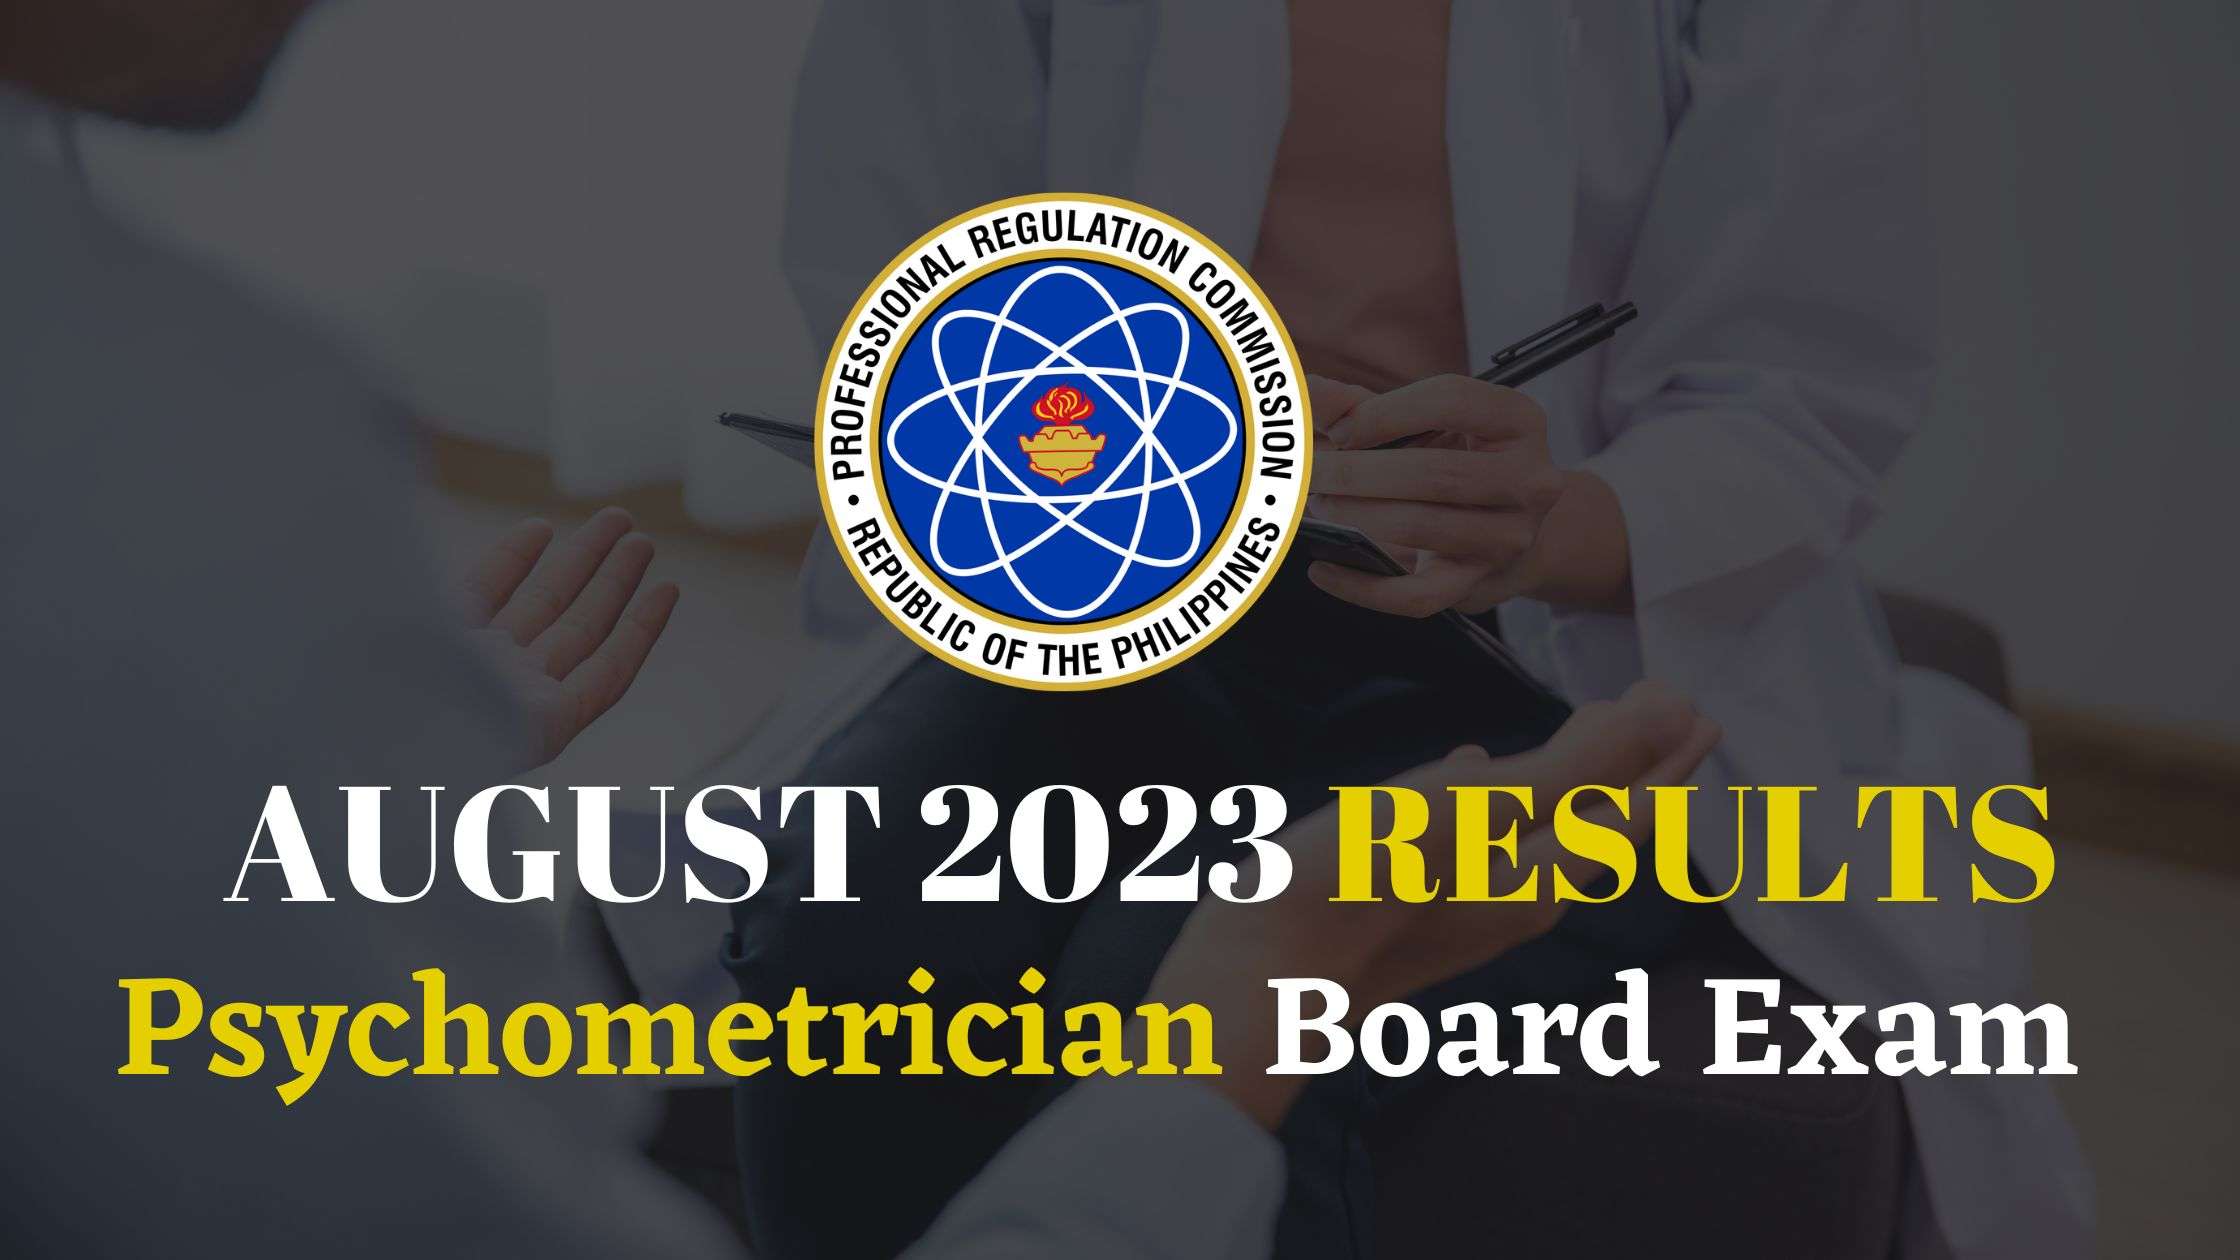 room assignment of psychometrician board exam 2023